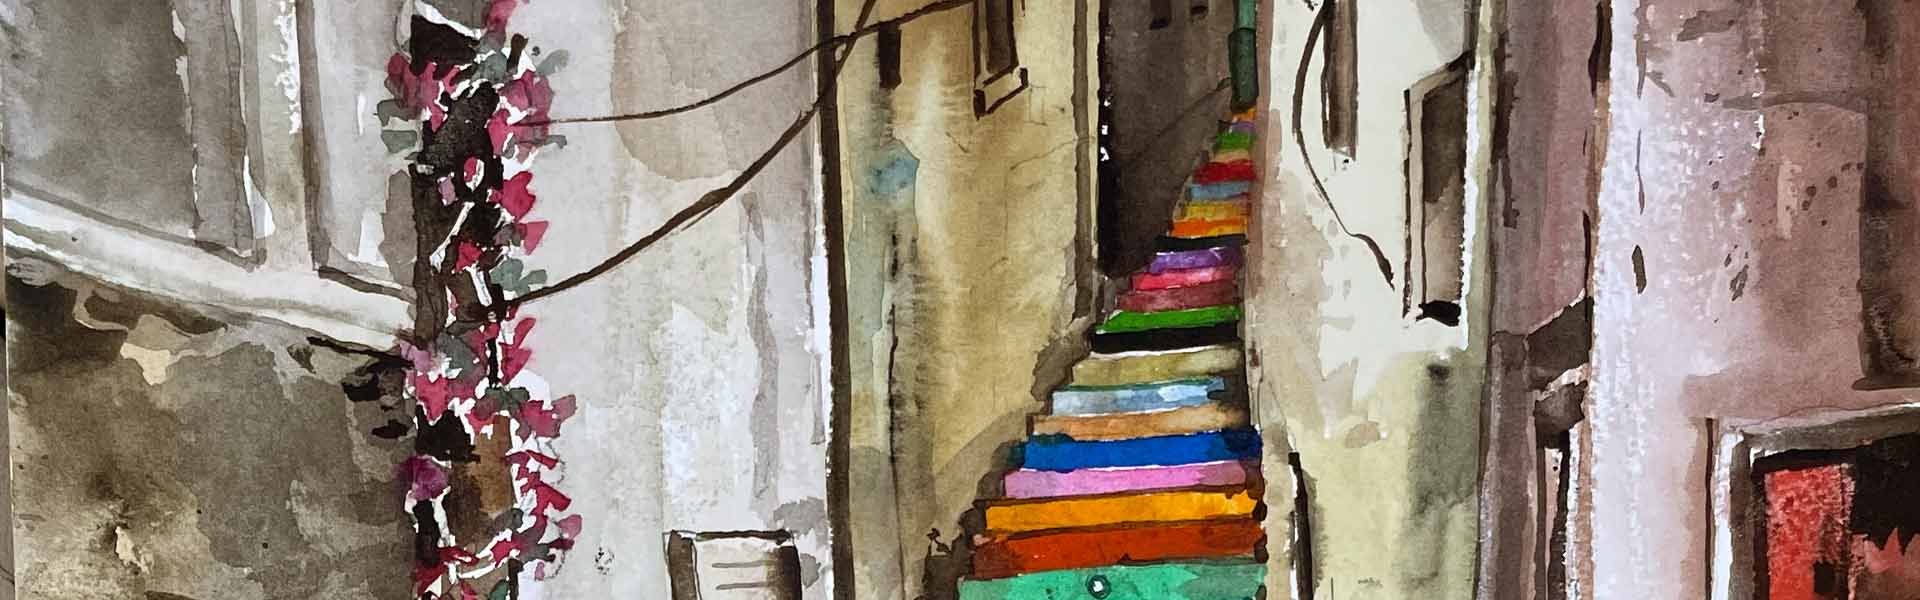 A watercolor painting of colorful stairs